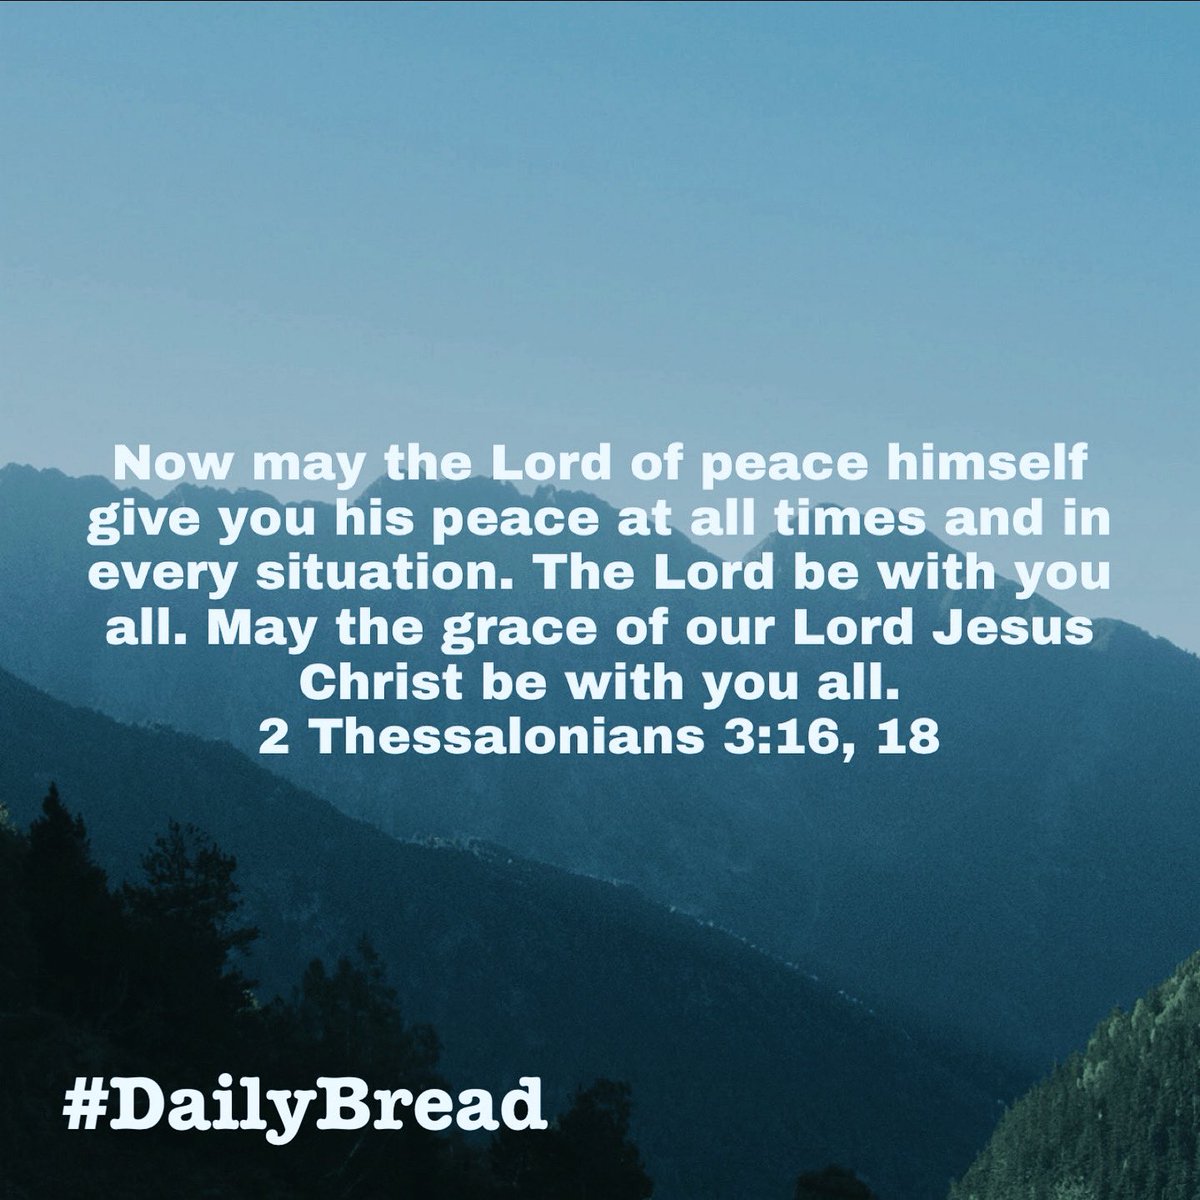 Now may the Lord of peace Himself give you His peace at all times & in every situation… The Lord be with you all… May the grace of our Lord Jesus Christ be with you all… 
2 Thessalonians 3:16, 18
#DailyBread #GodsPeace #GodsGrace #SpeakLife